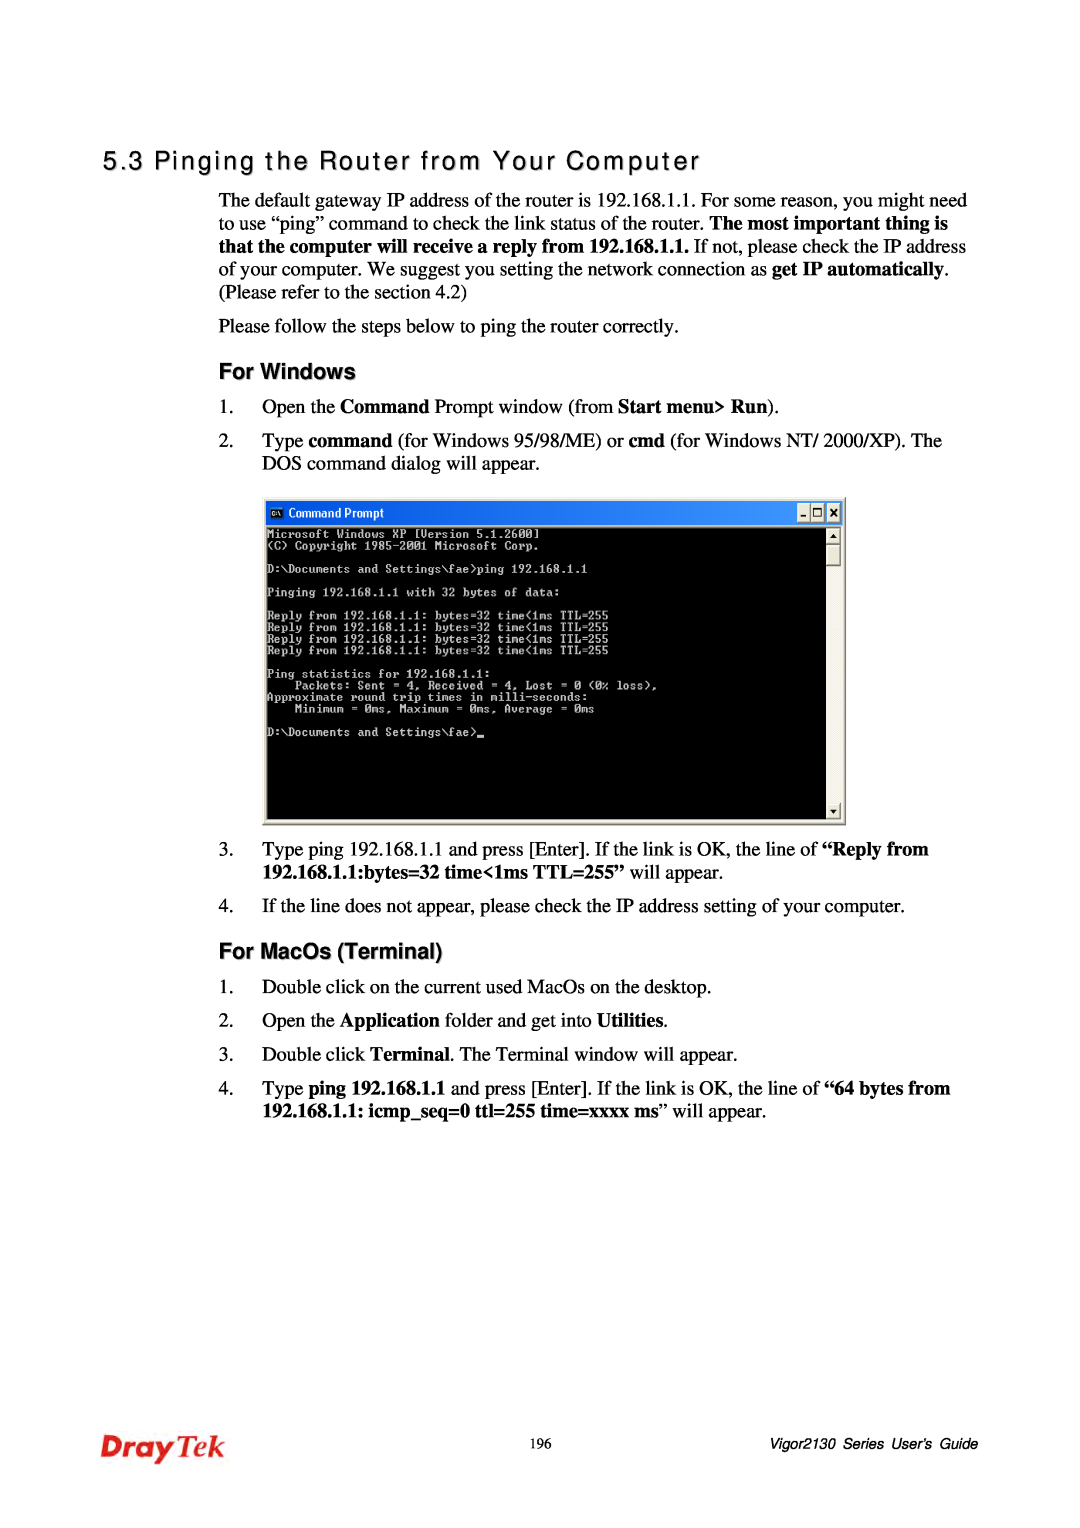 Draytek 2130 manual Pinging the Router from Your Computer, For MacOs Terminal, For Windows 